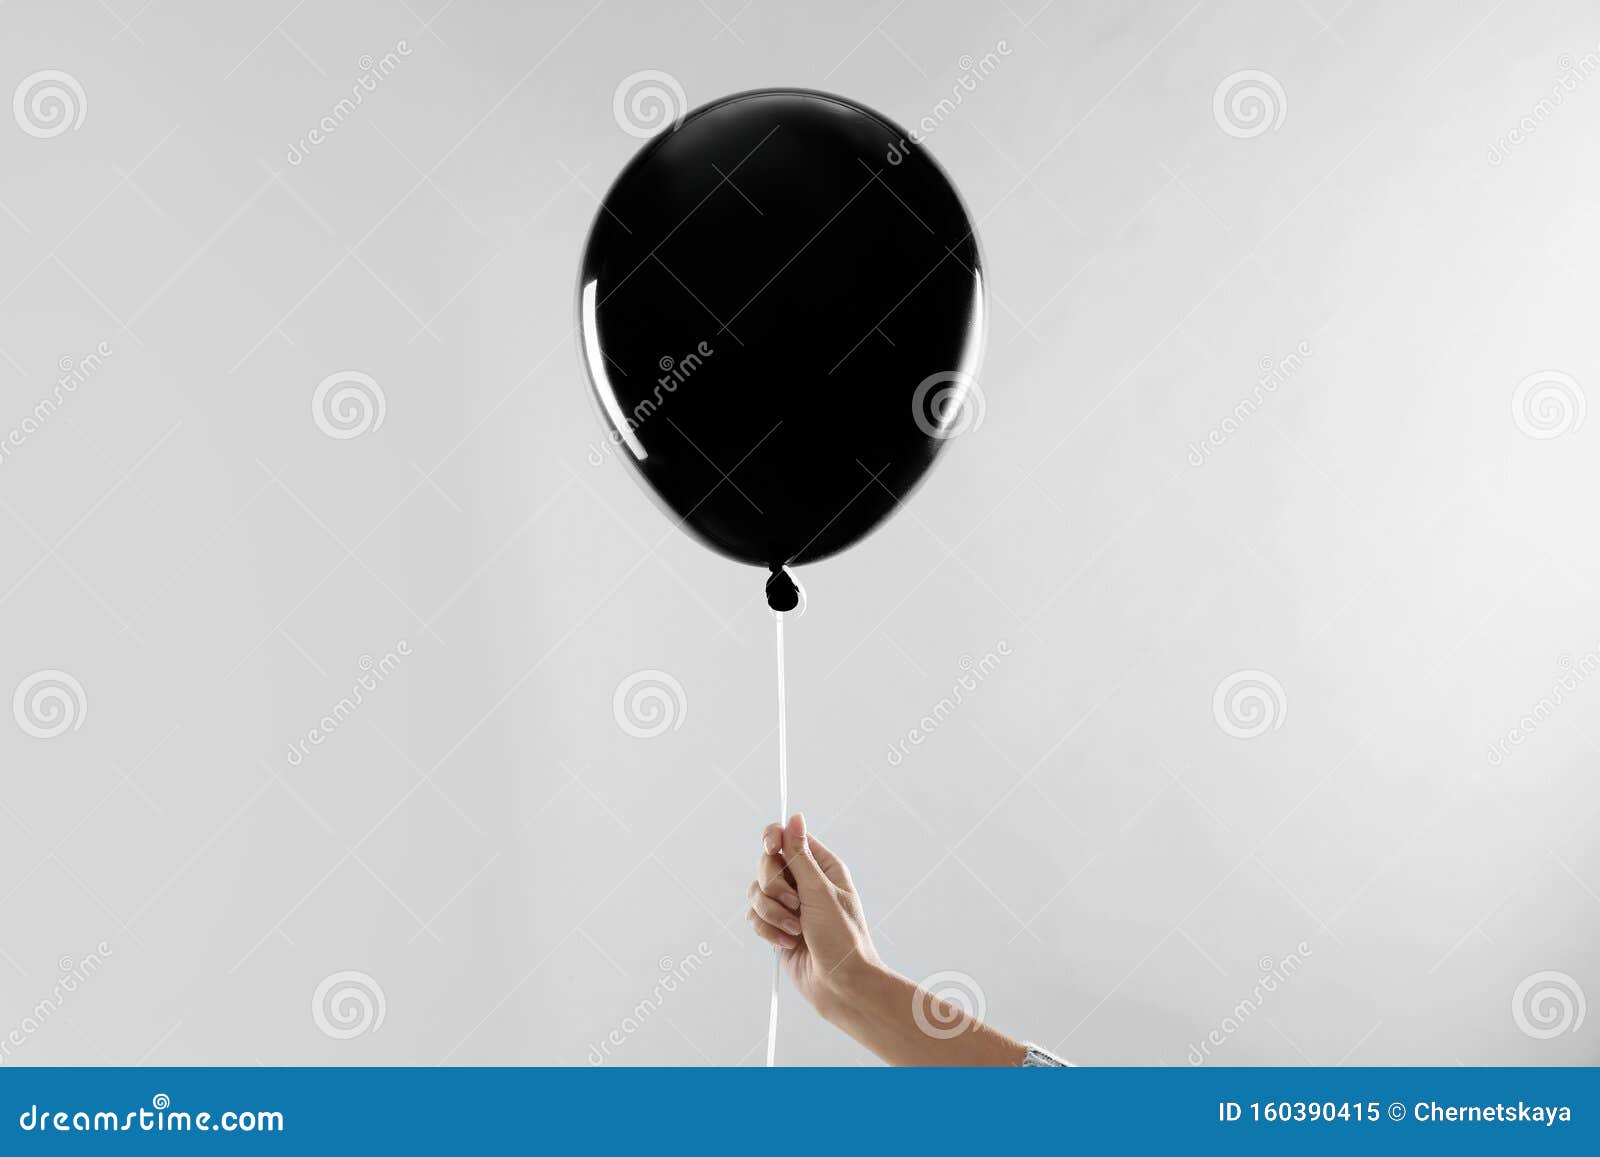 Woman Holding Black Balloon For Halloween Party On Light Grey